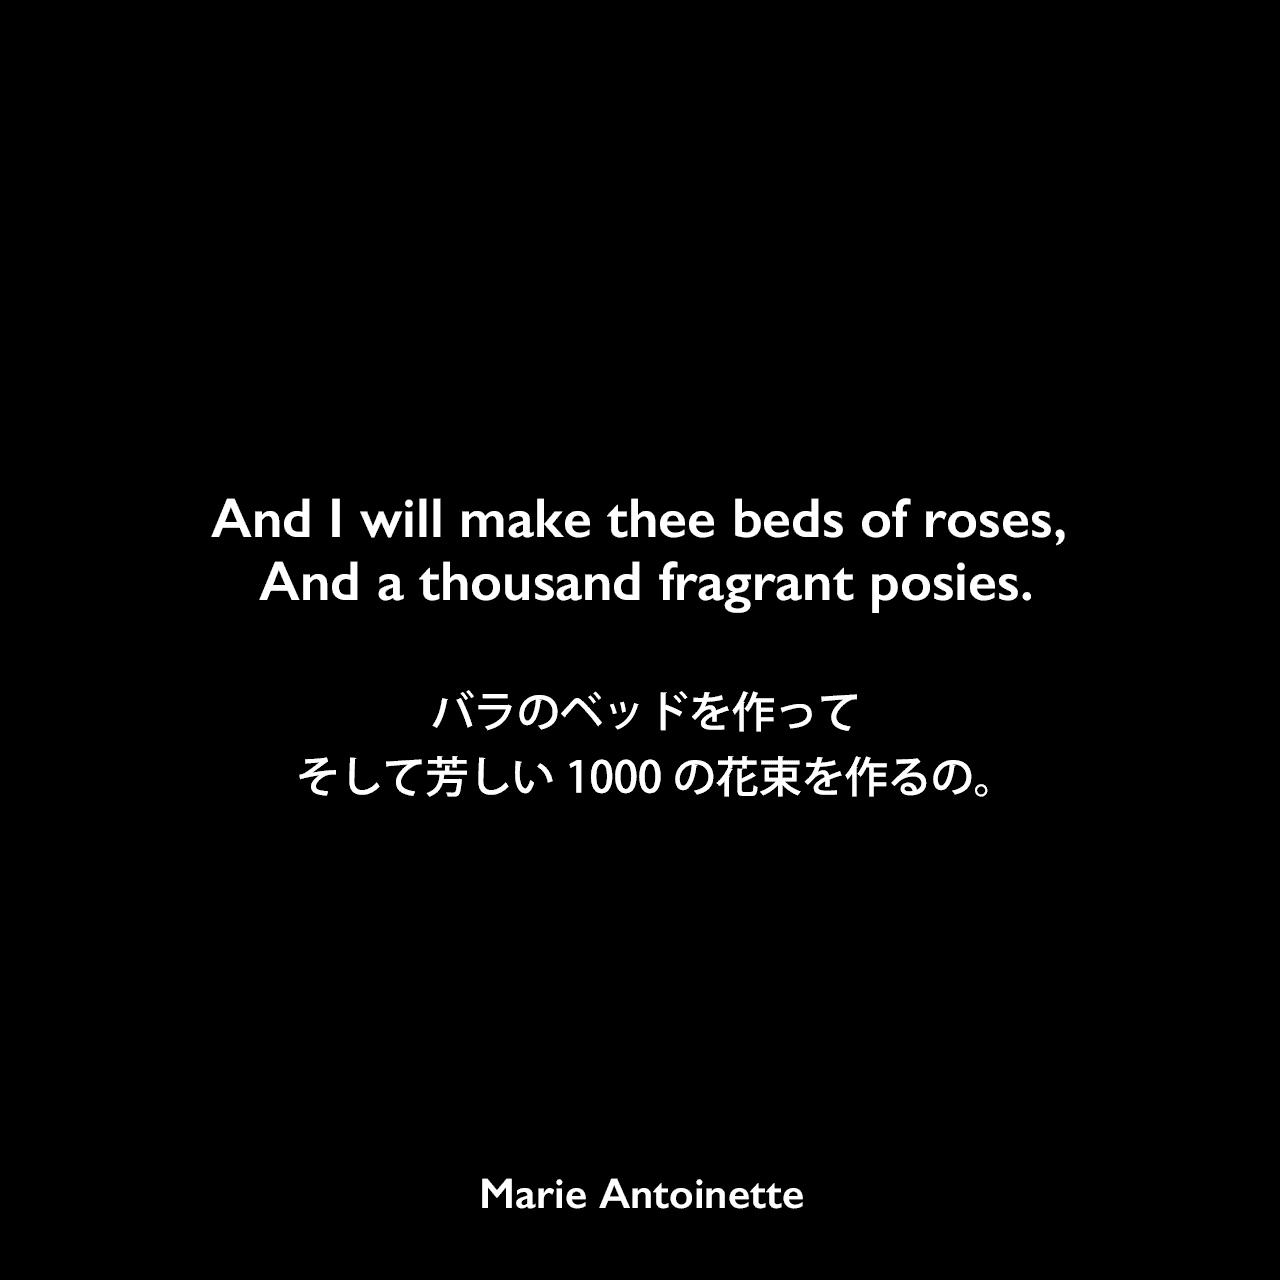 And I will make thee beds of roses, And a thousand fragrant posies.バラのベッドを作ってそして芳しい1000の花束を作るの。Marie Antoinette